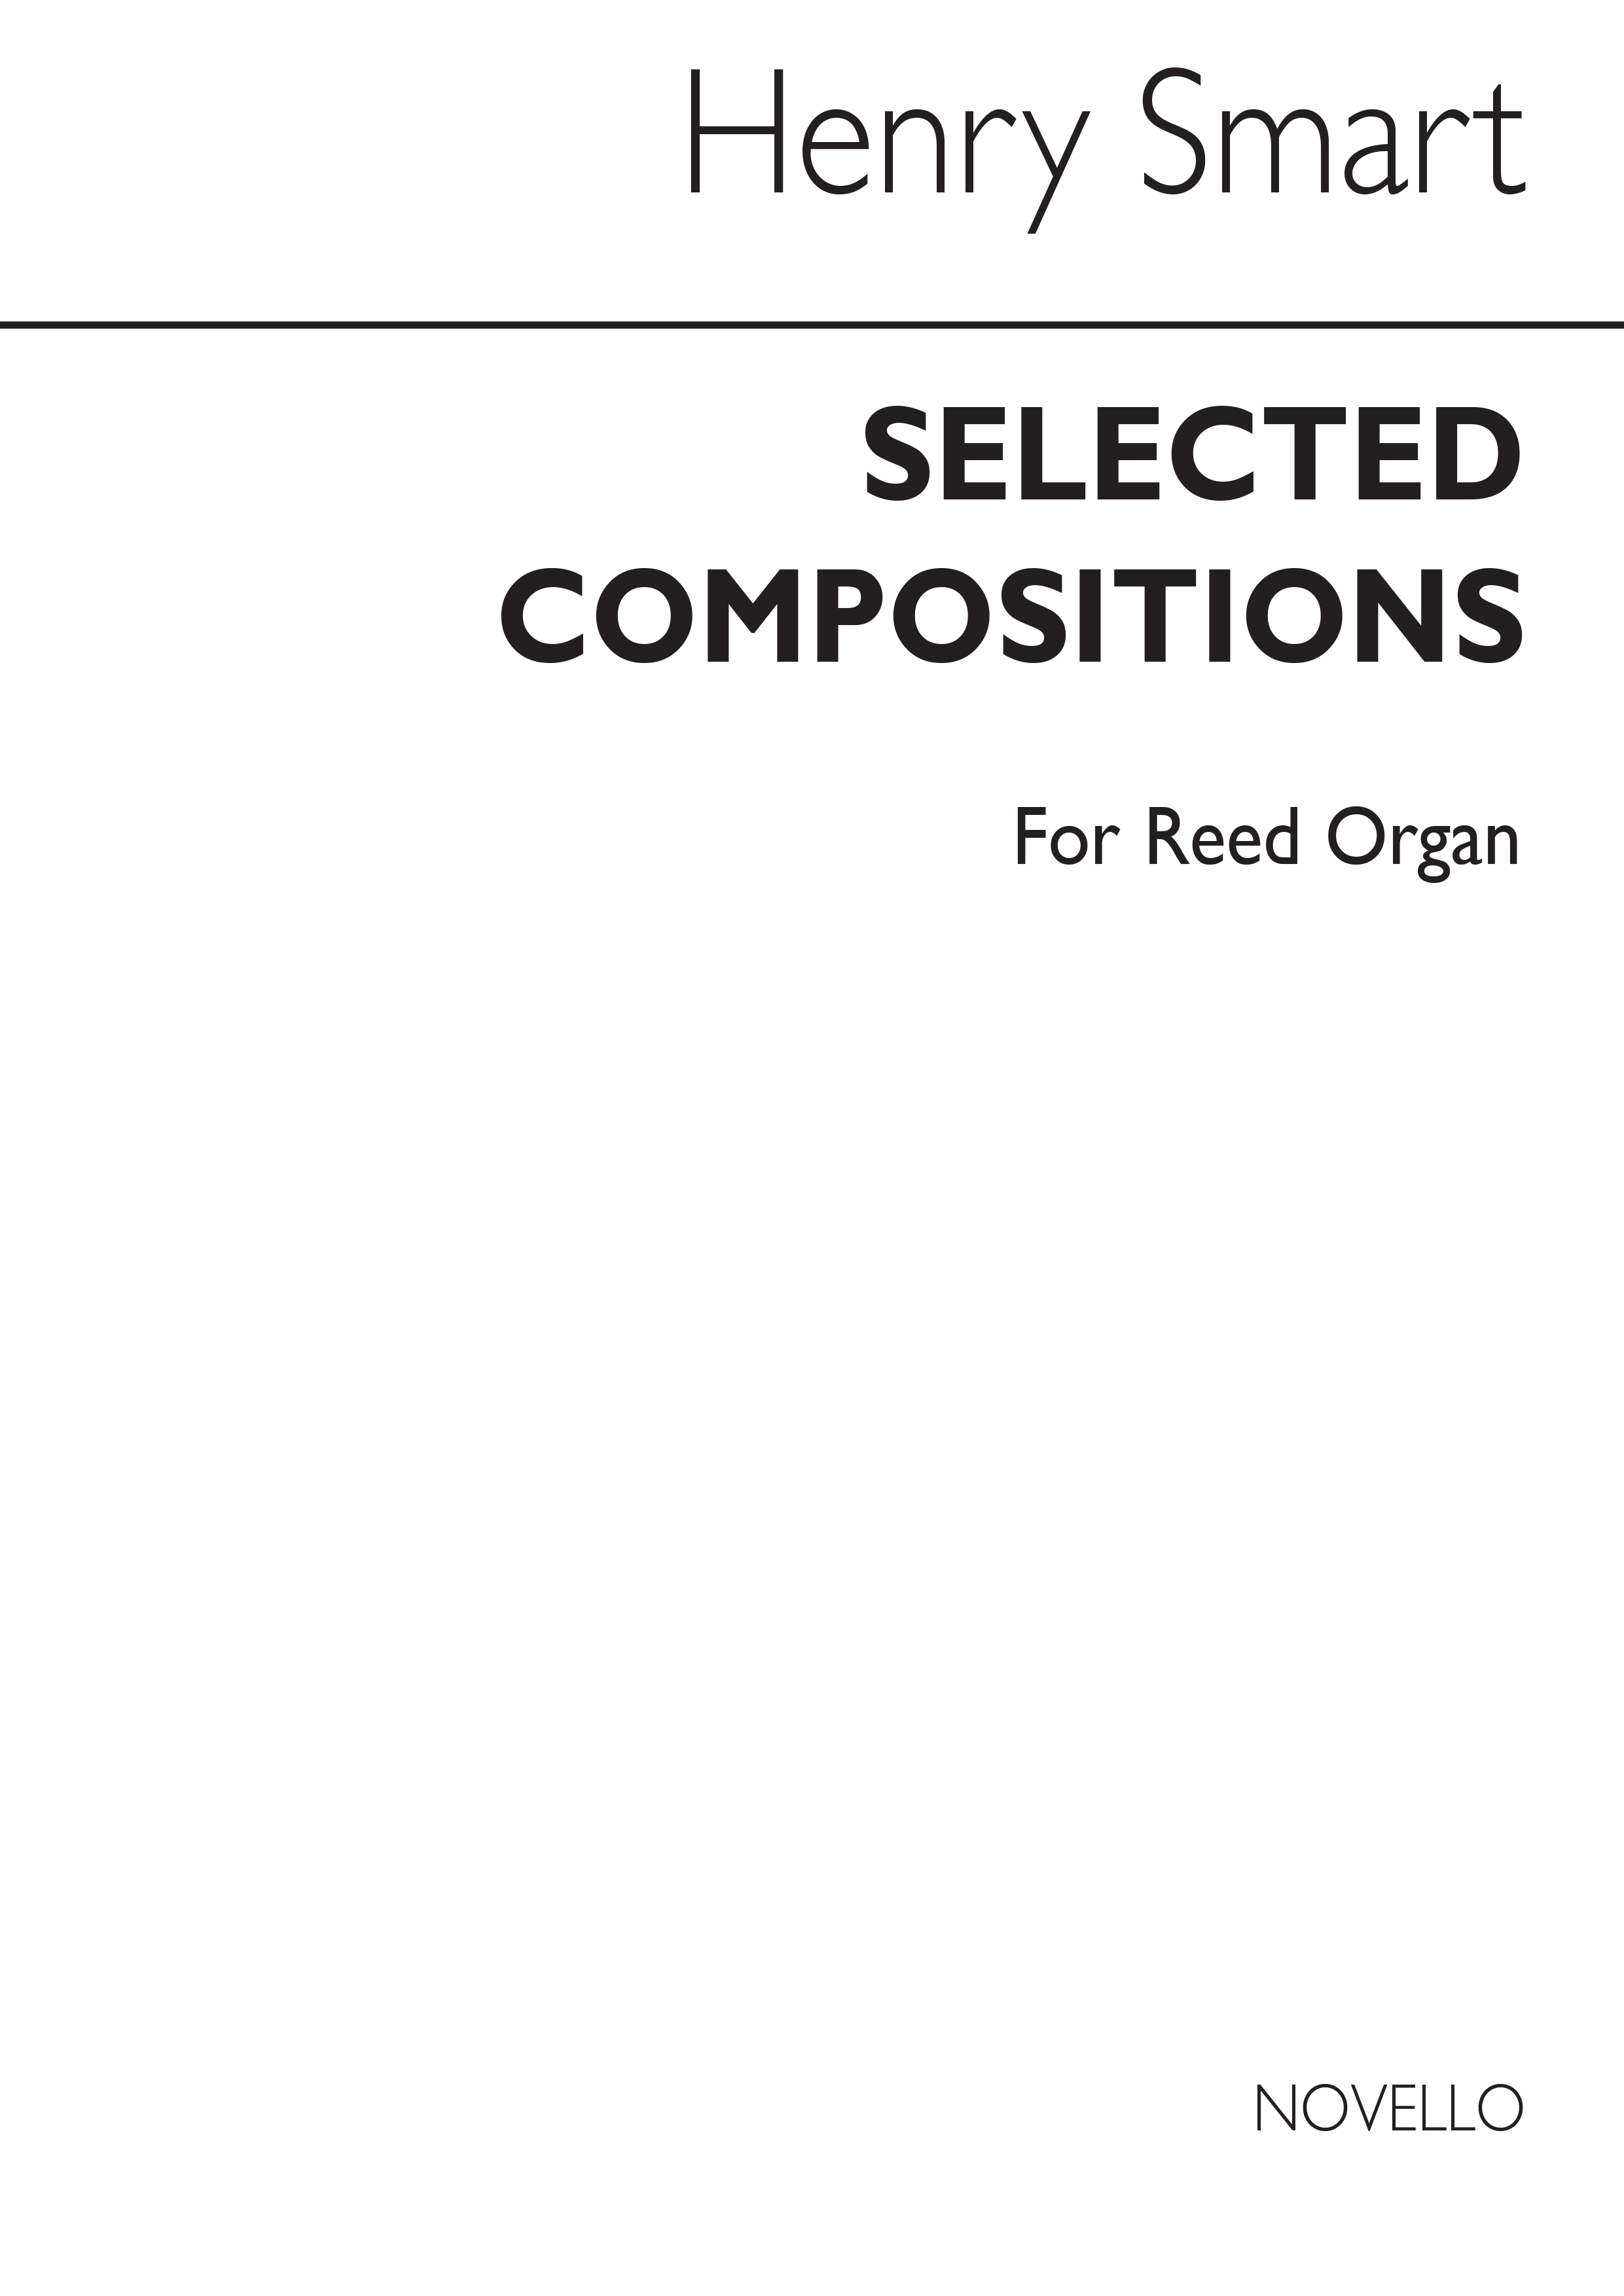 Henry Smart: Selected Compositions Book 2 For Reed Organ